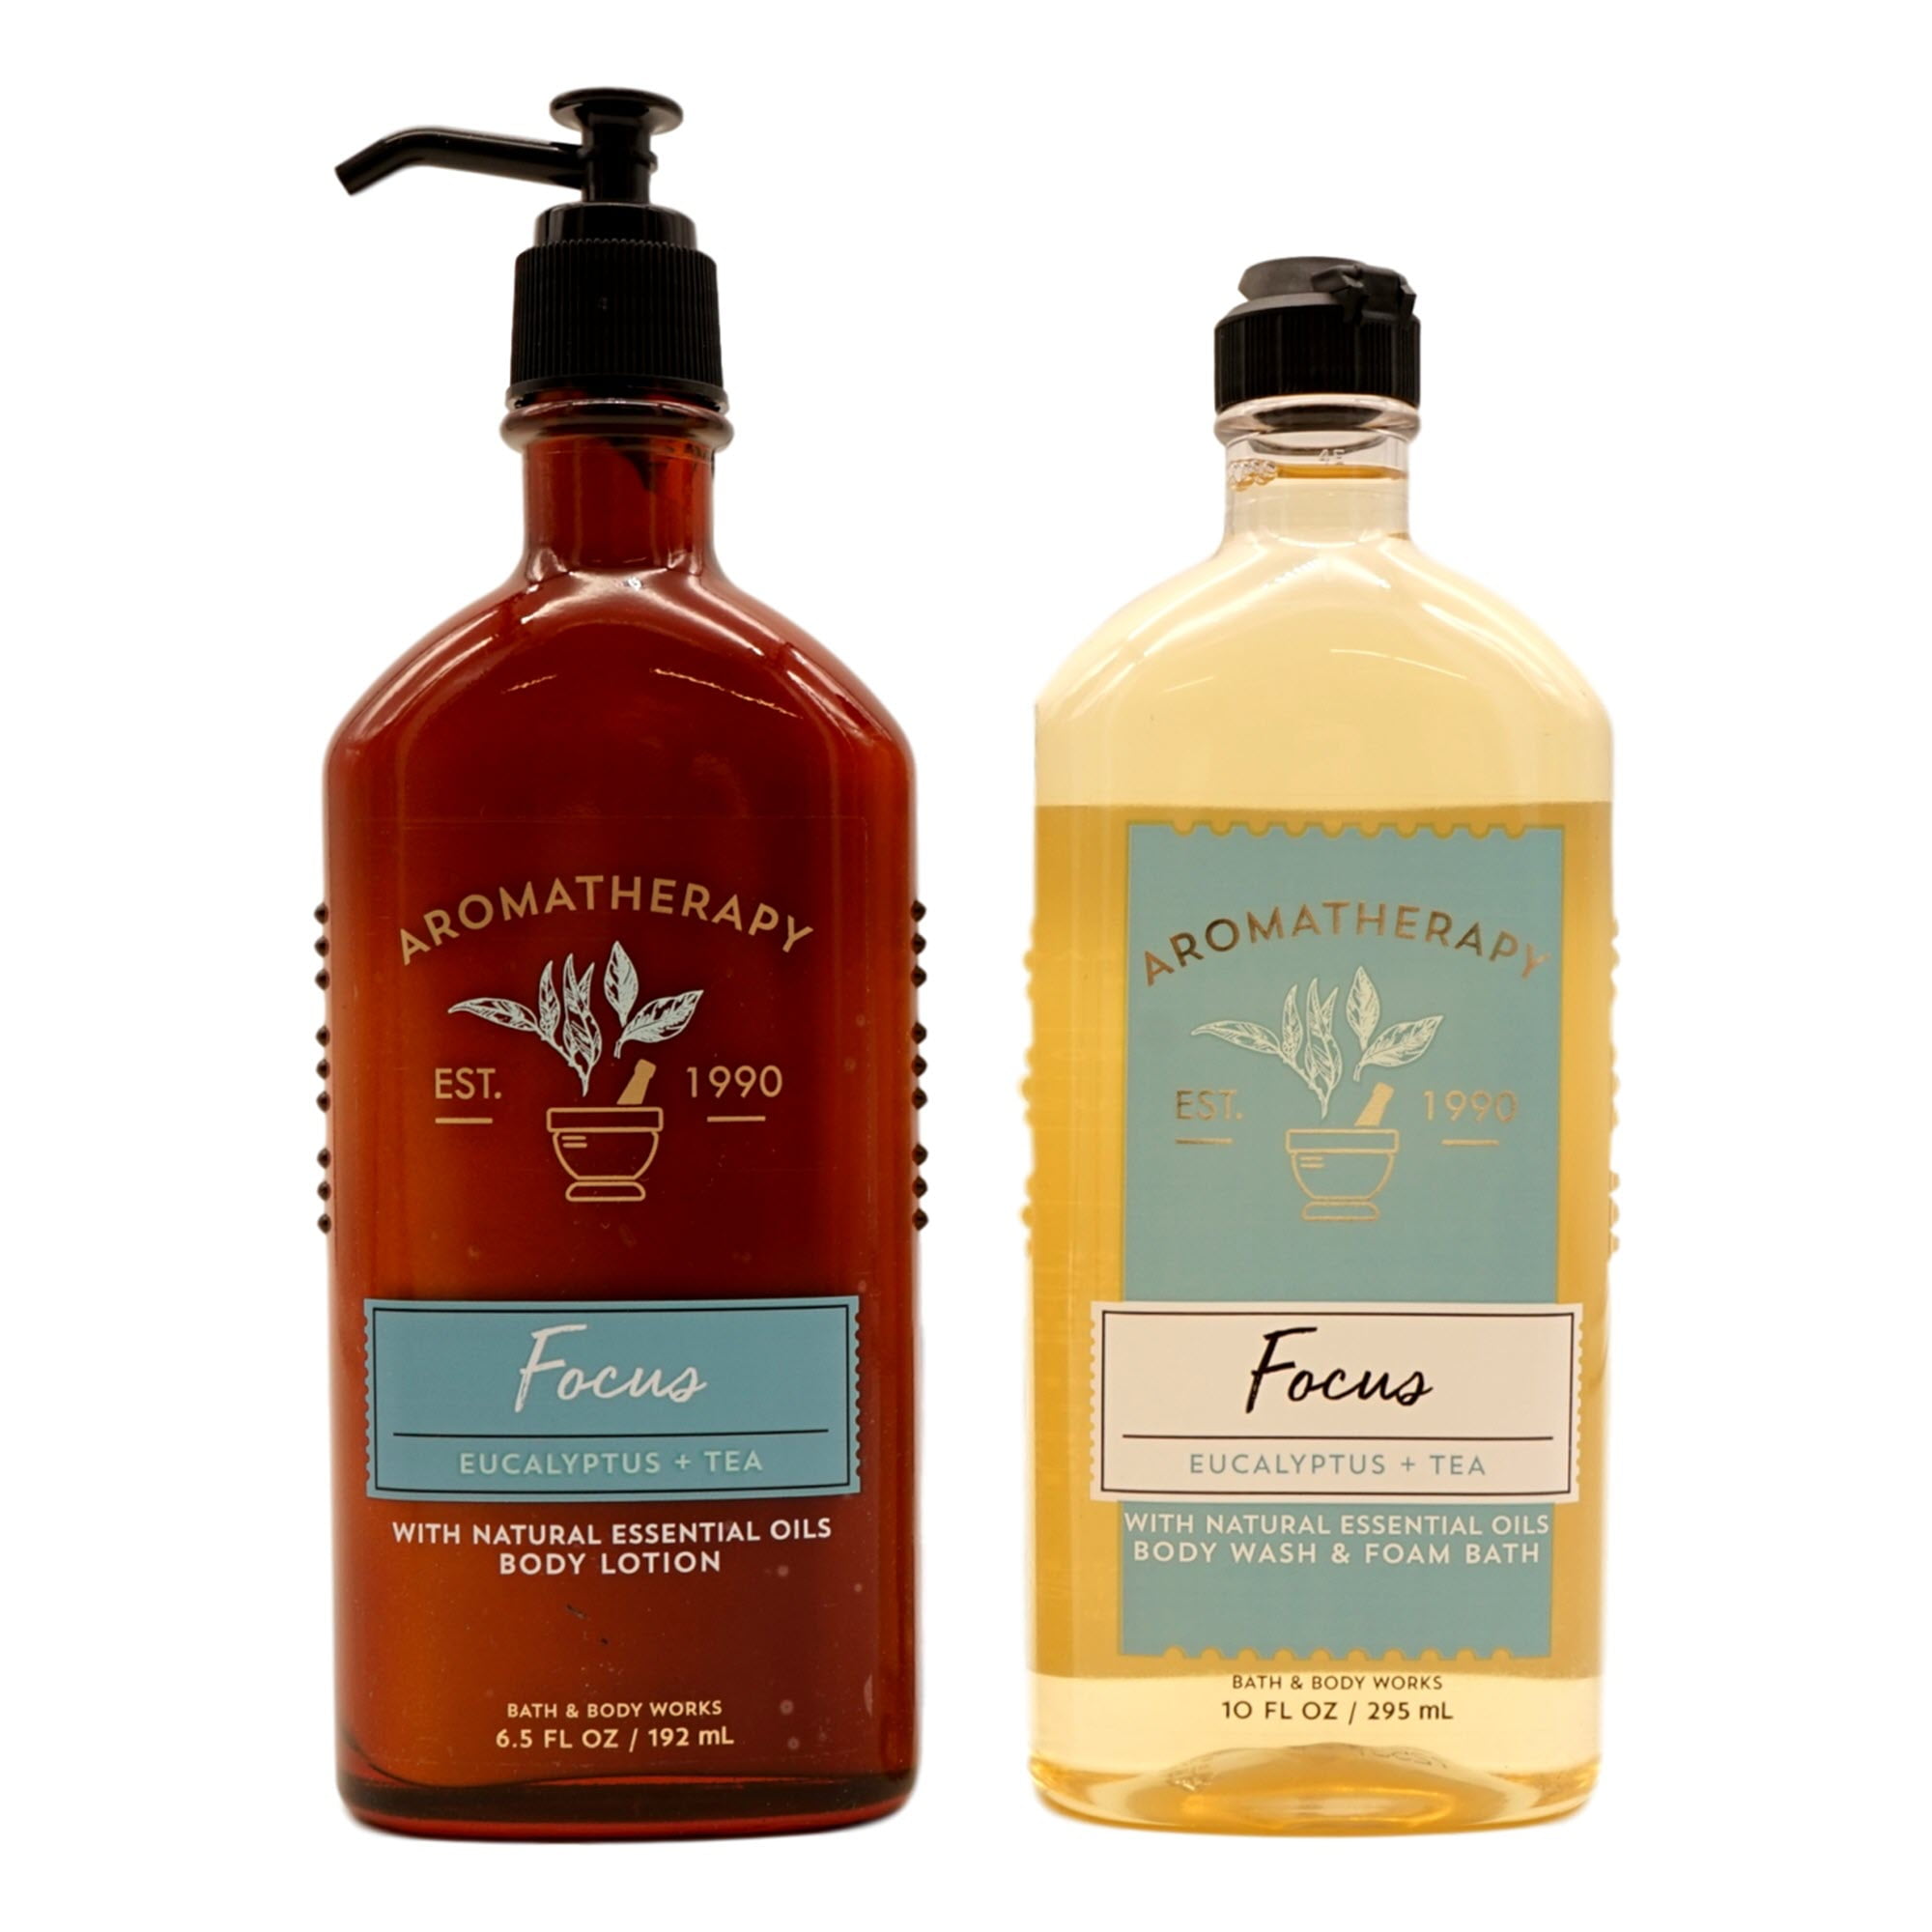 Aromatherapy Focus Body Lotion and Body Wash Gift Set